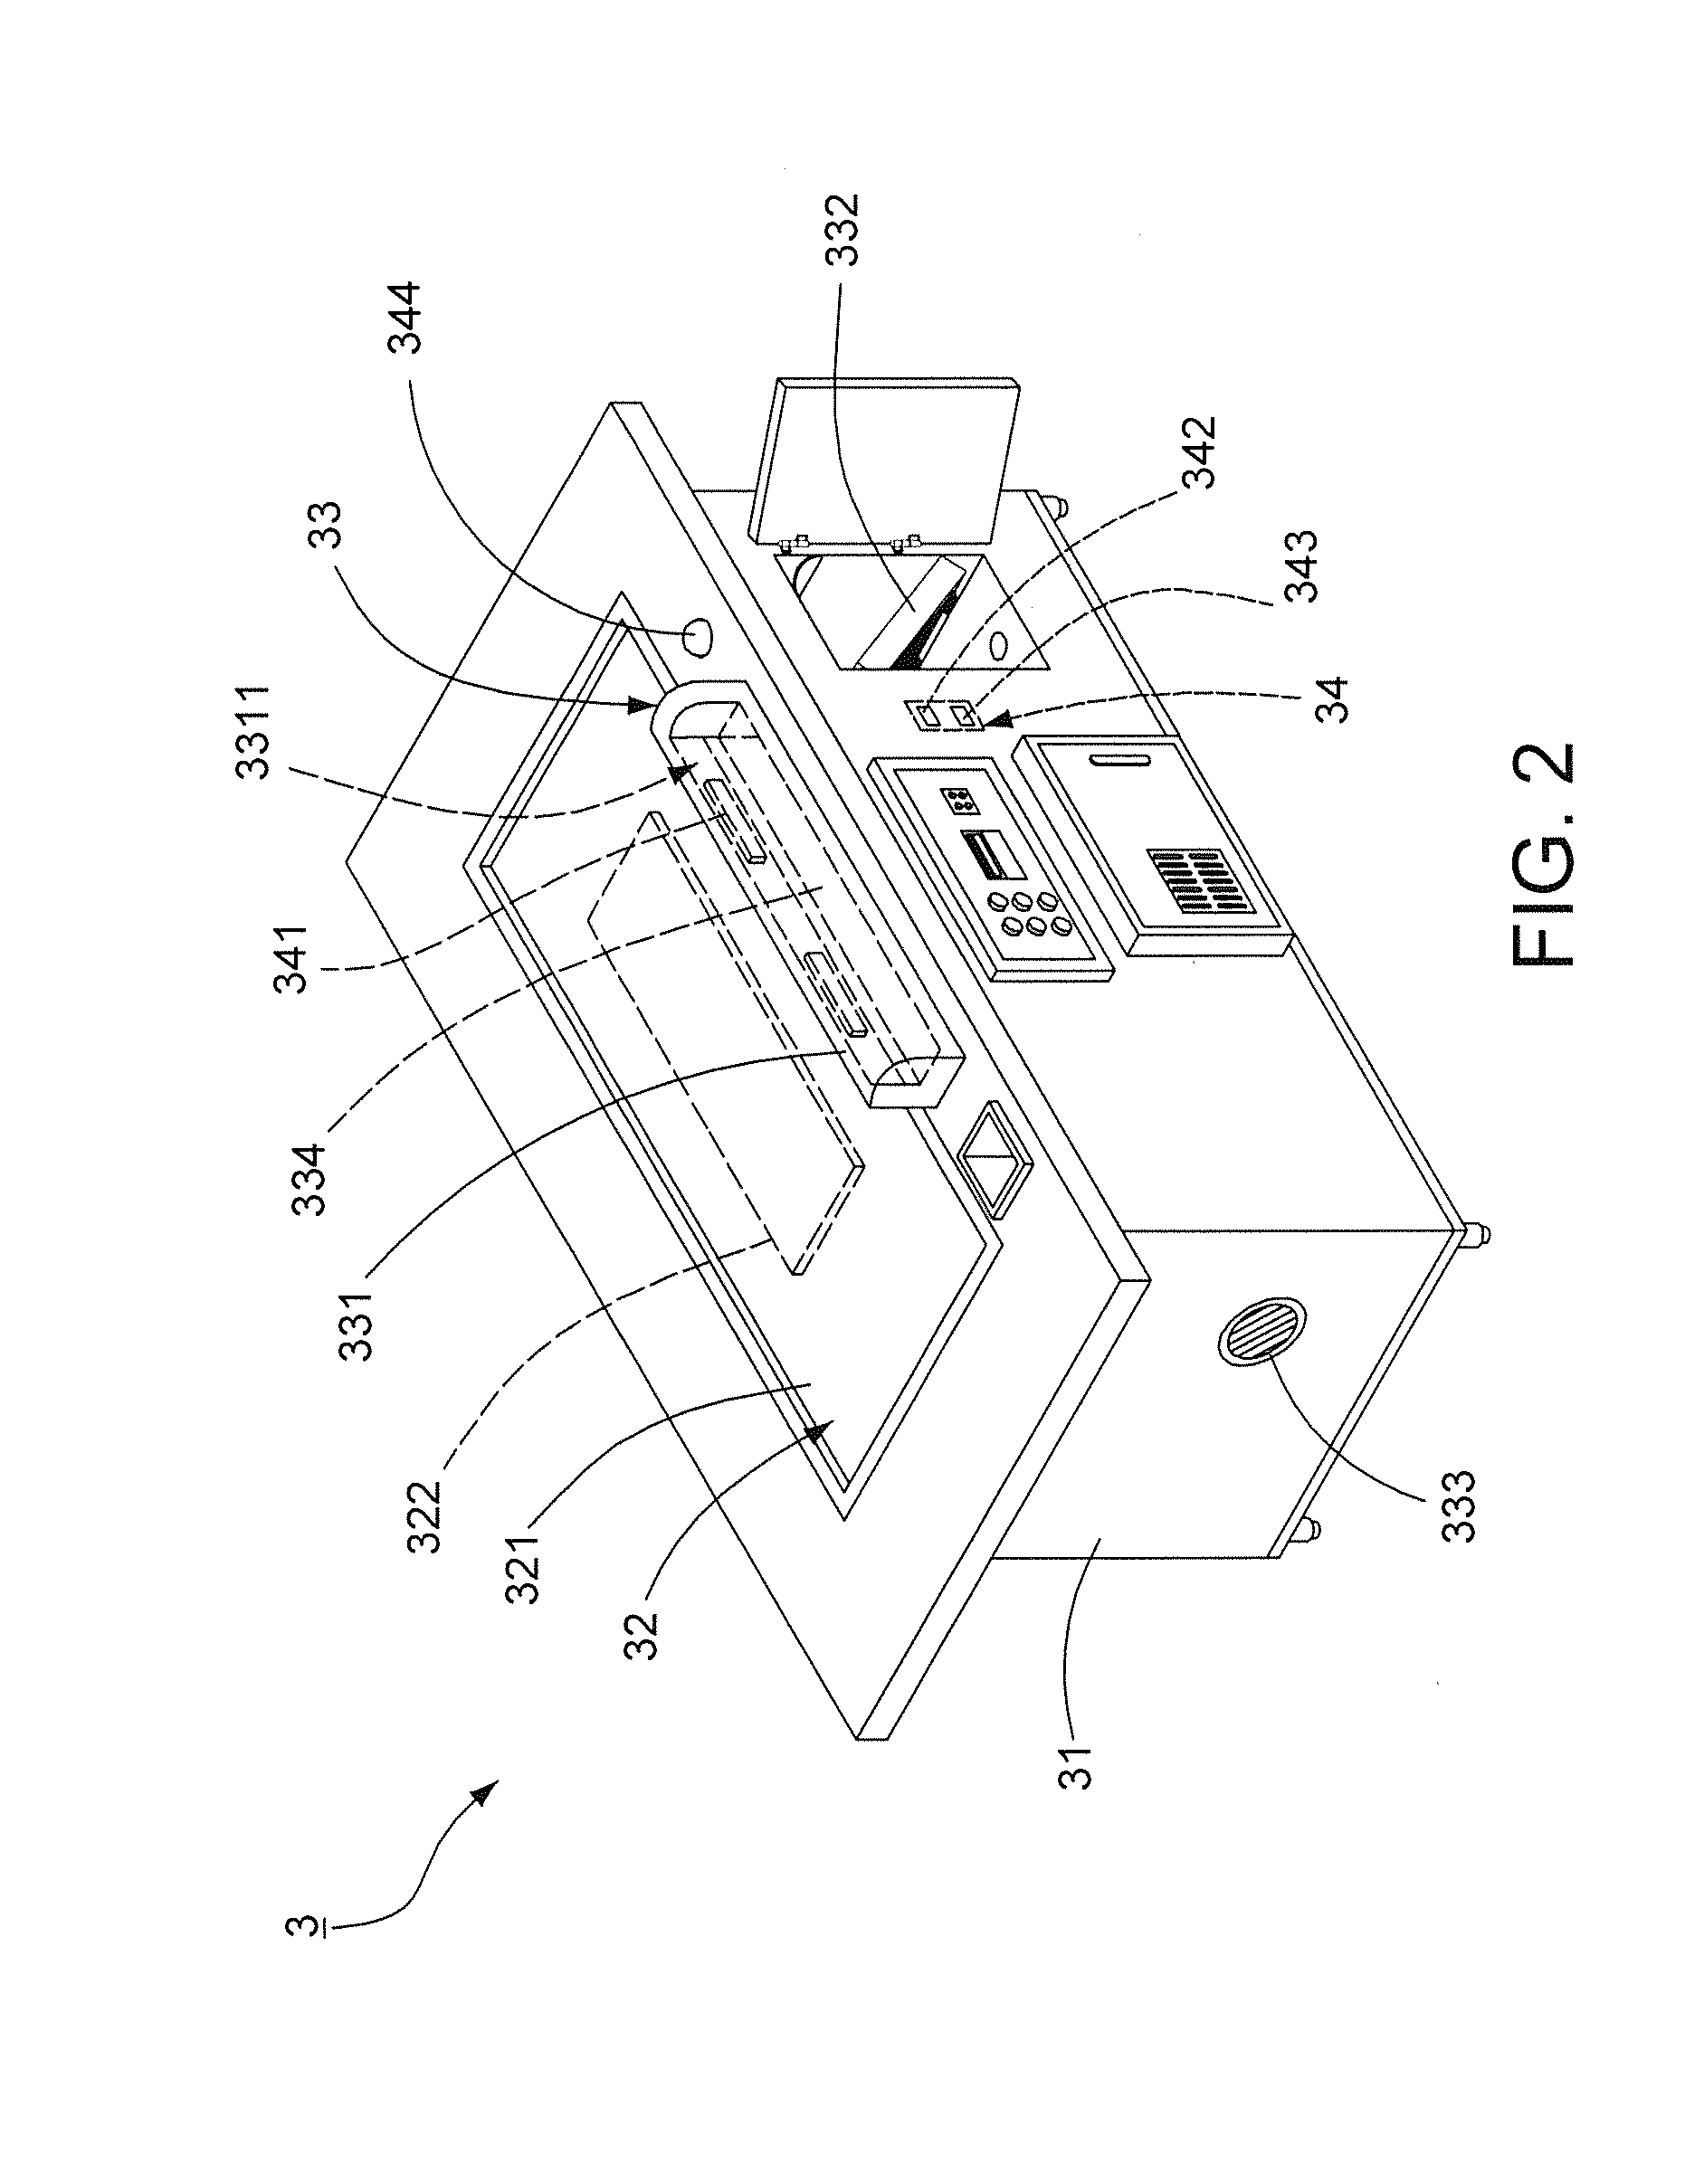 Assembly for cooking with a safety device